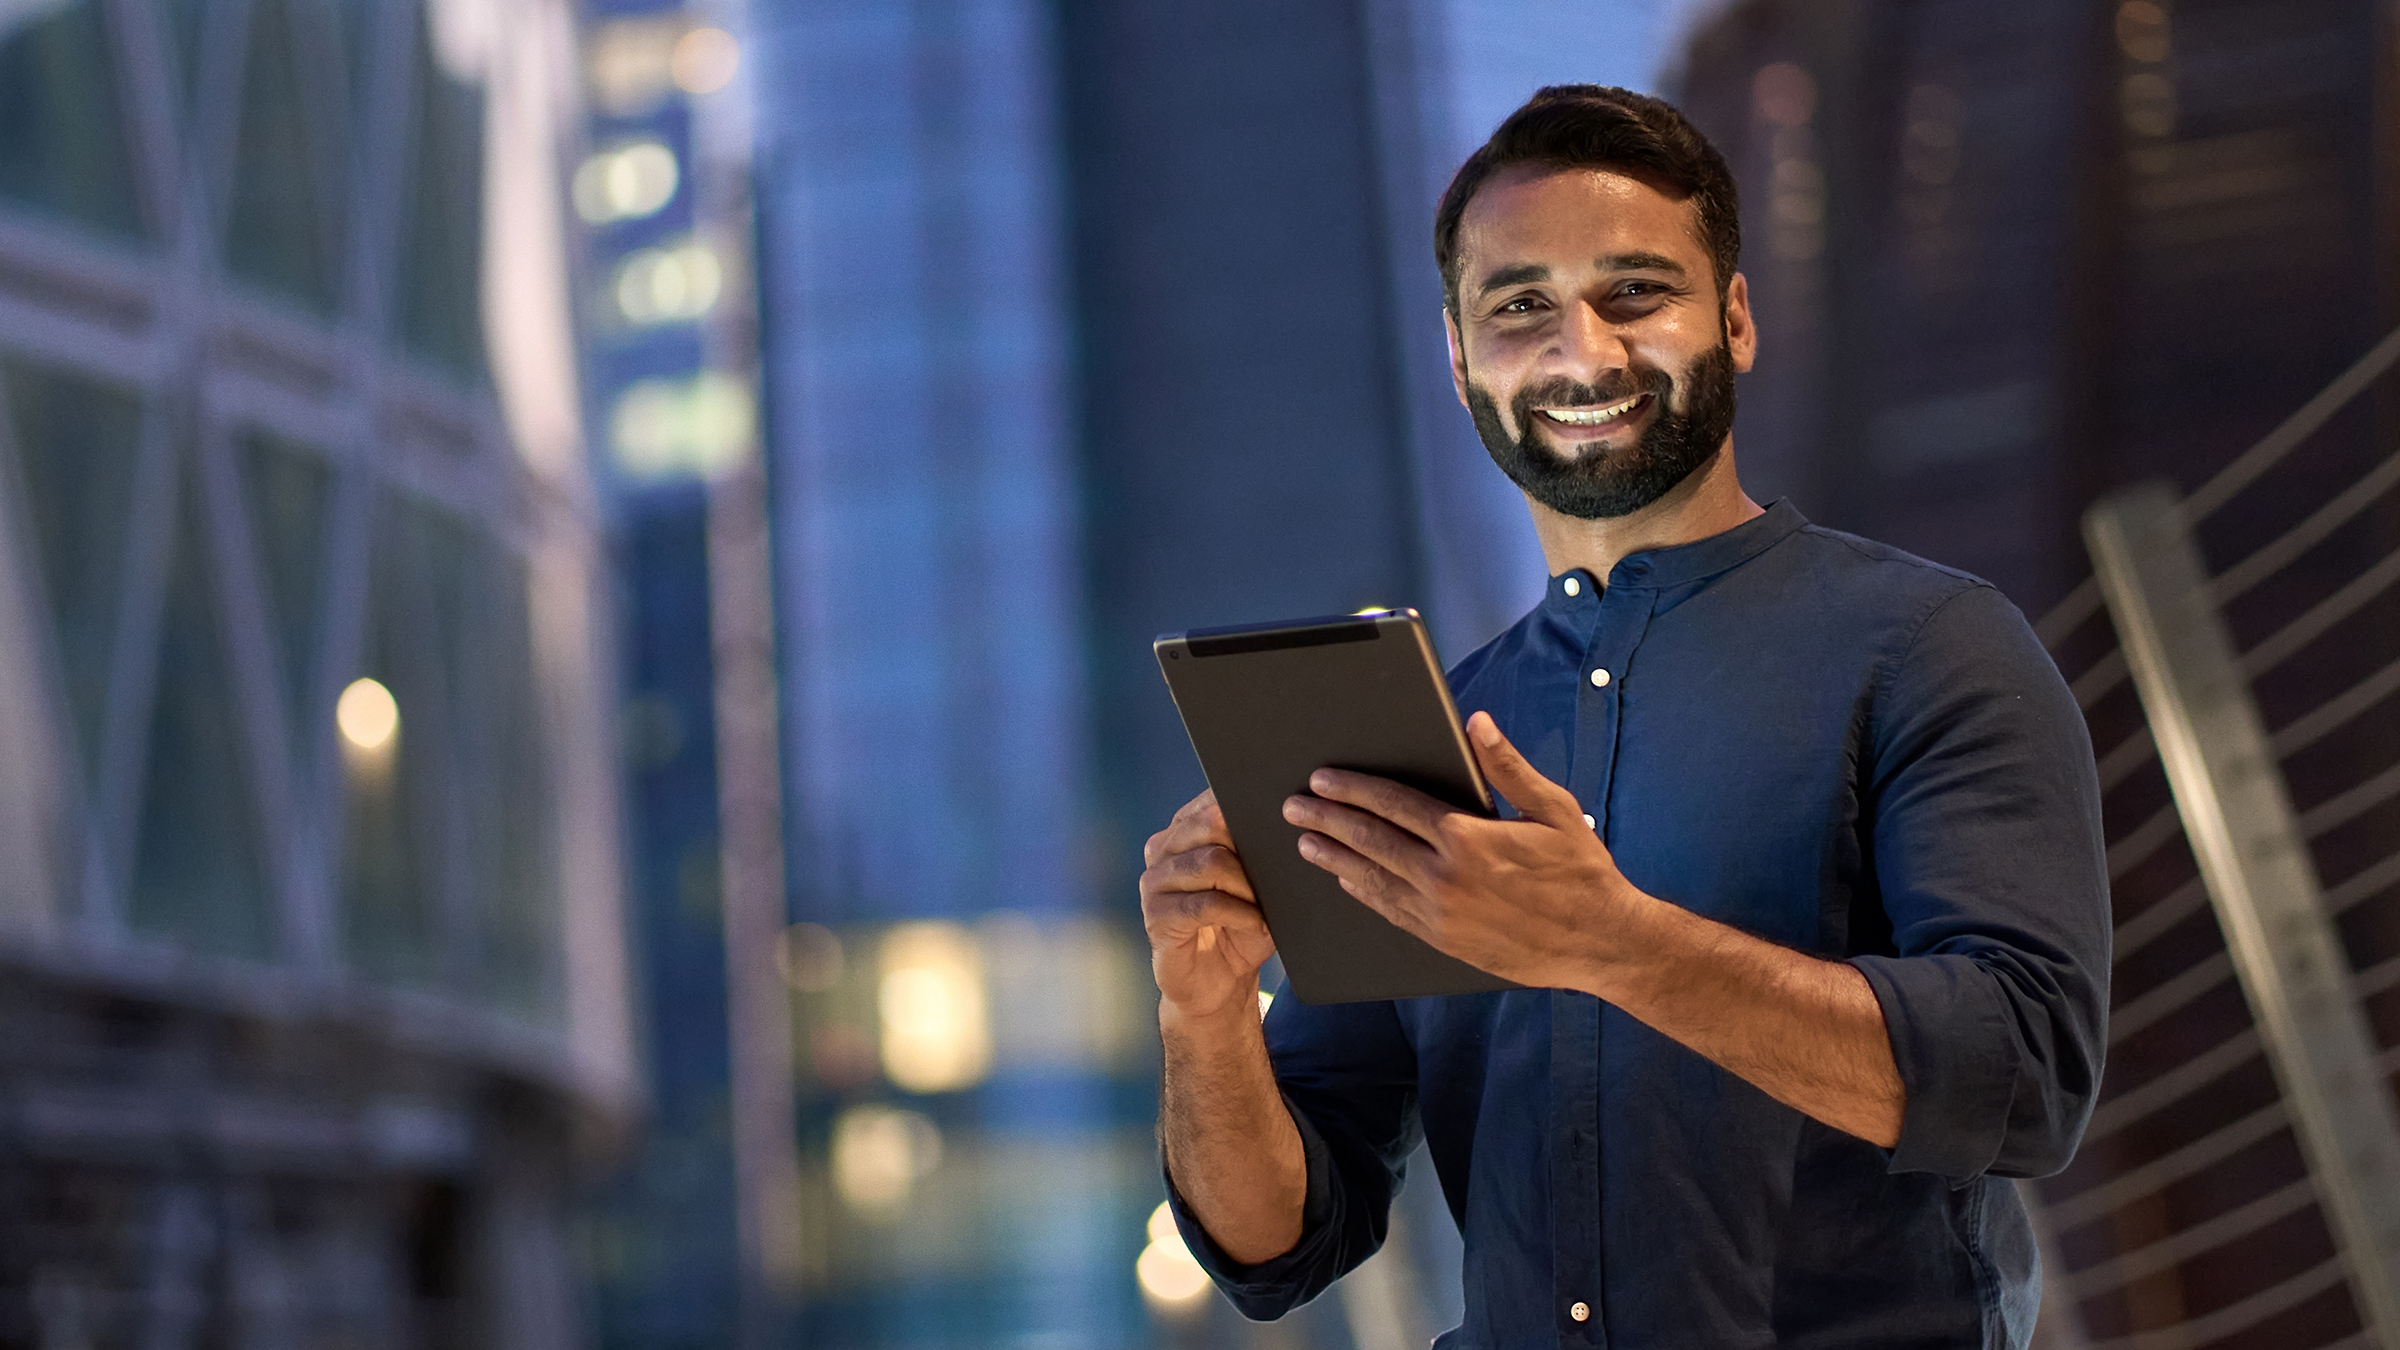 Guy smiling with an ipad in his hand